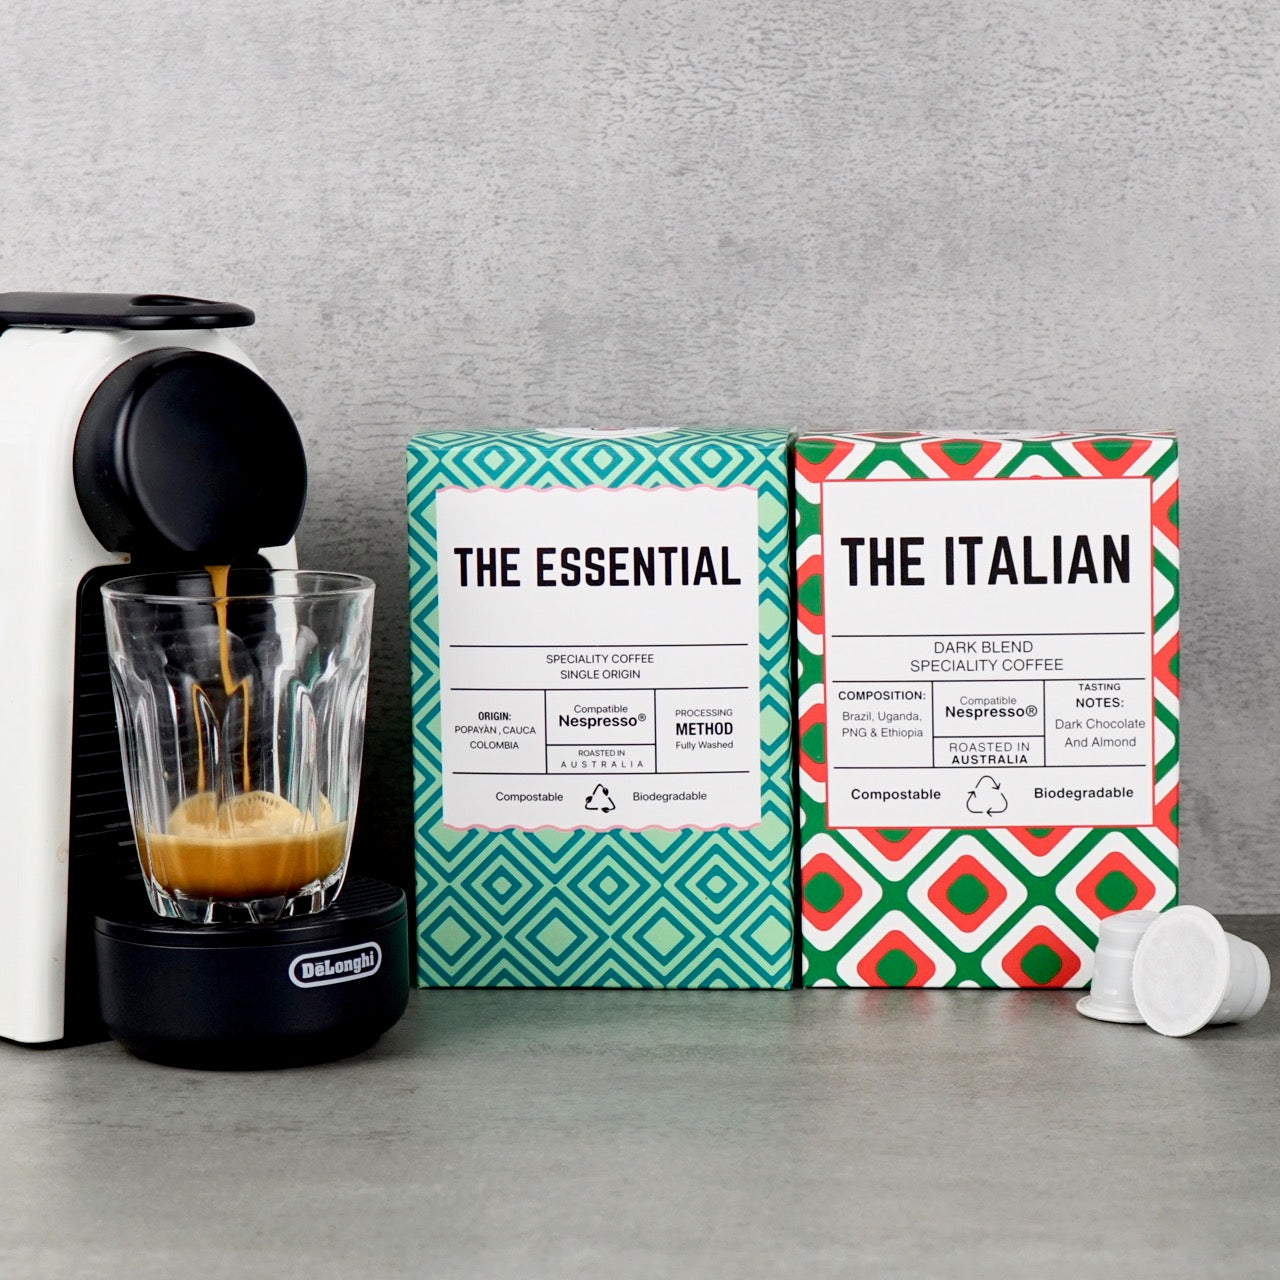 The Barista Pods Taster Pack